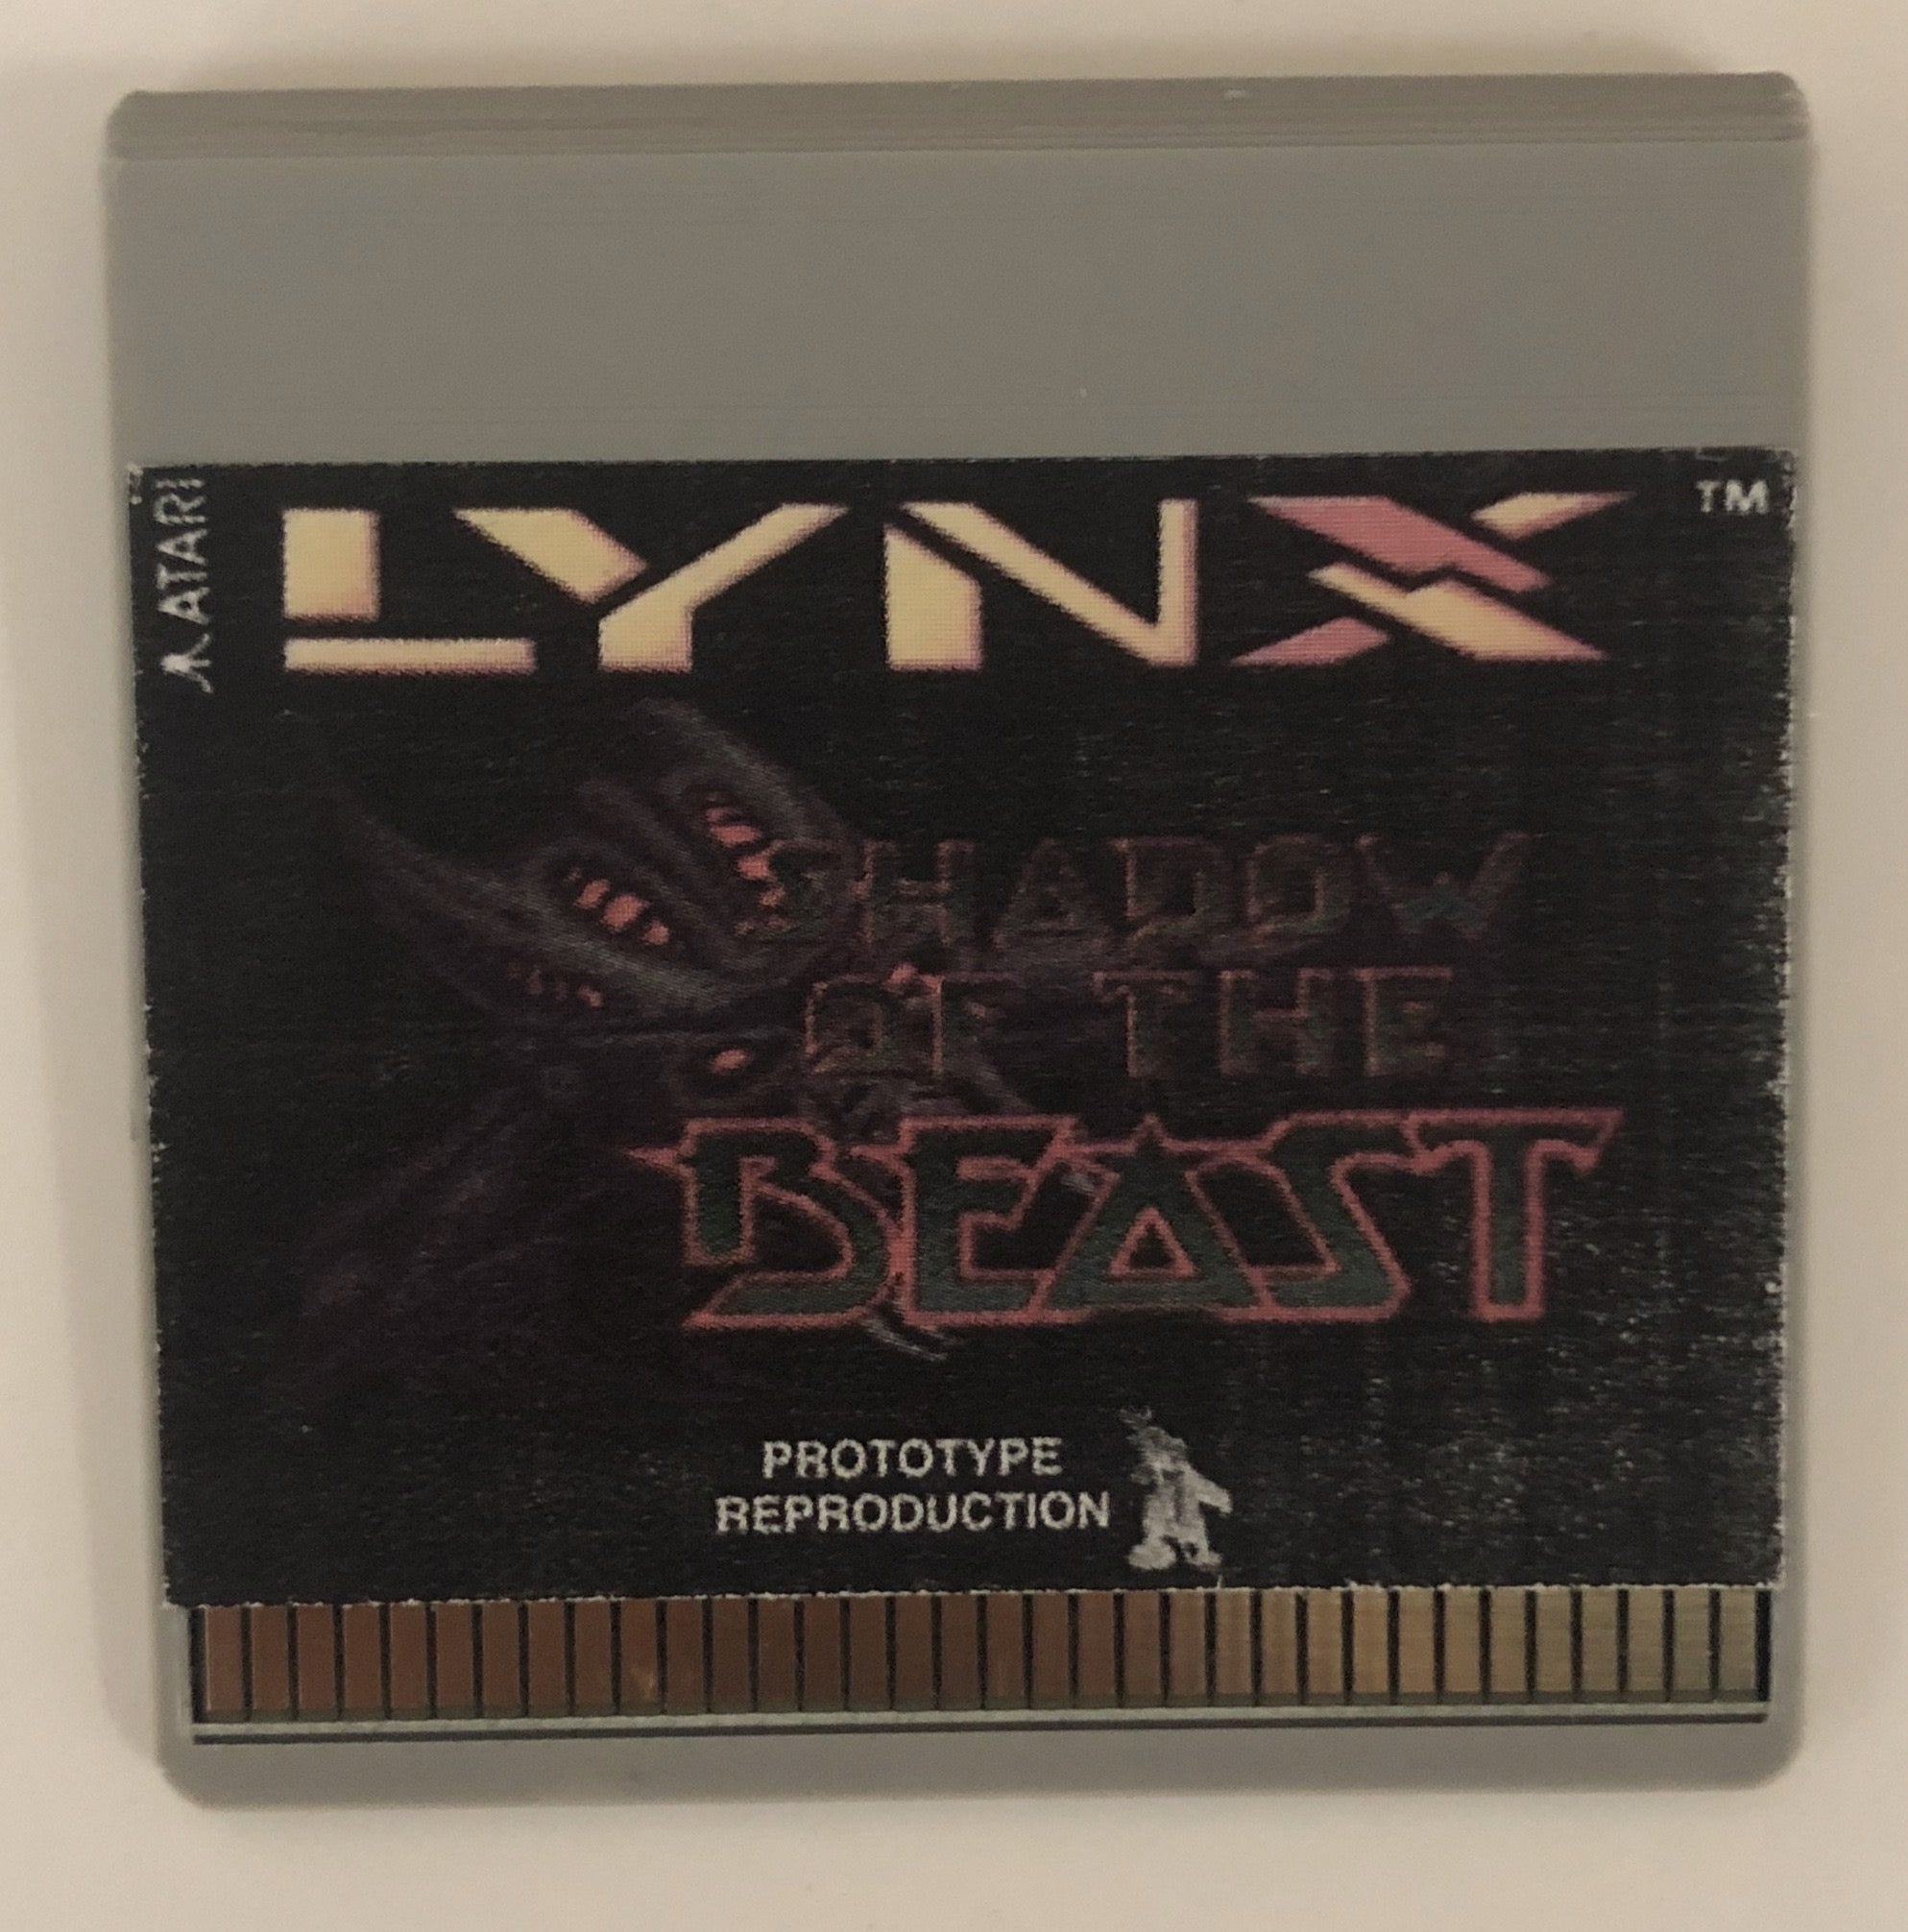 "Shadow of the Beast" Prototype Reproduction